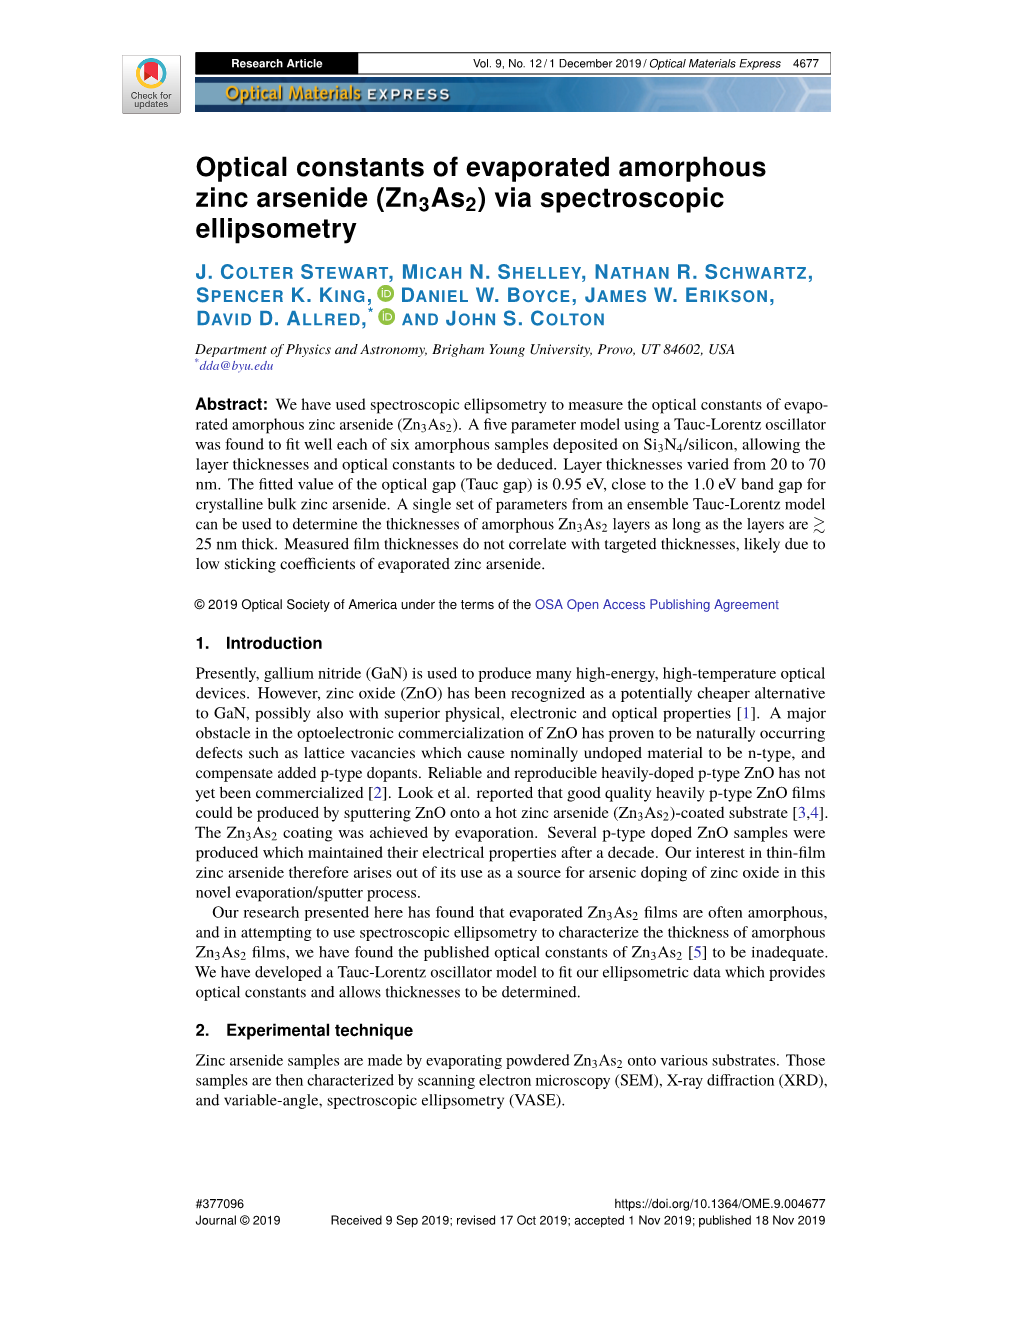 Optical Constants of Evaporated Amorphous Zinc Arsenide (Zn 3 As 2